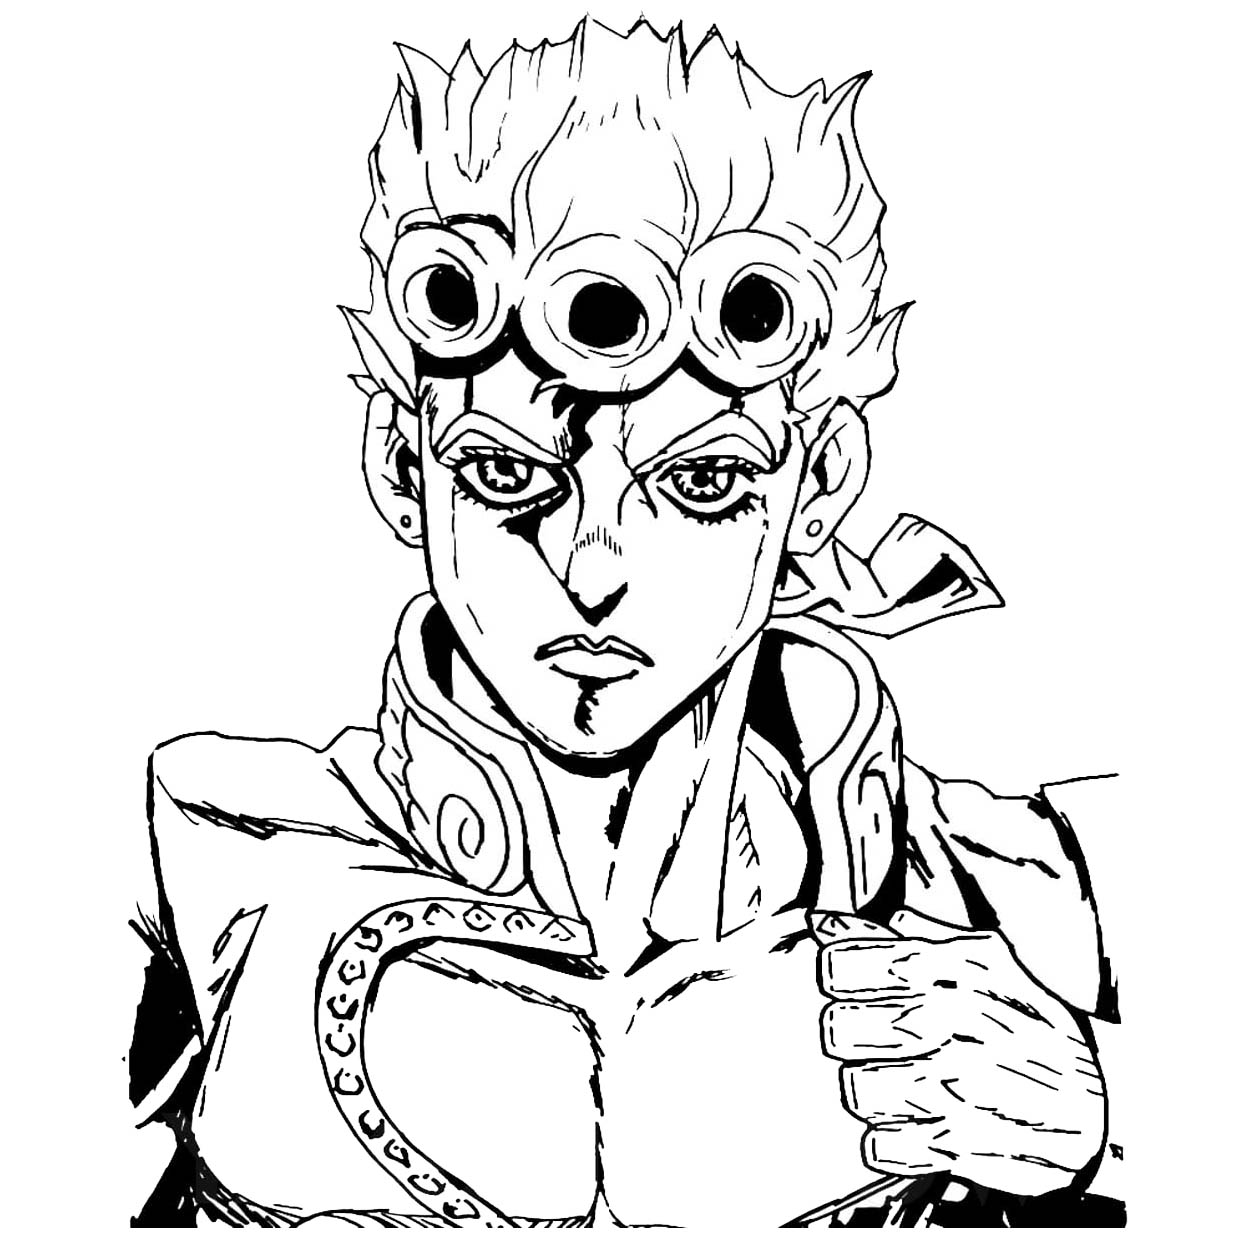 Free Giorno Giovanna from JoJo's Bizarre Adventure Coloring Pages printable